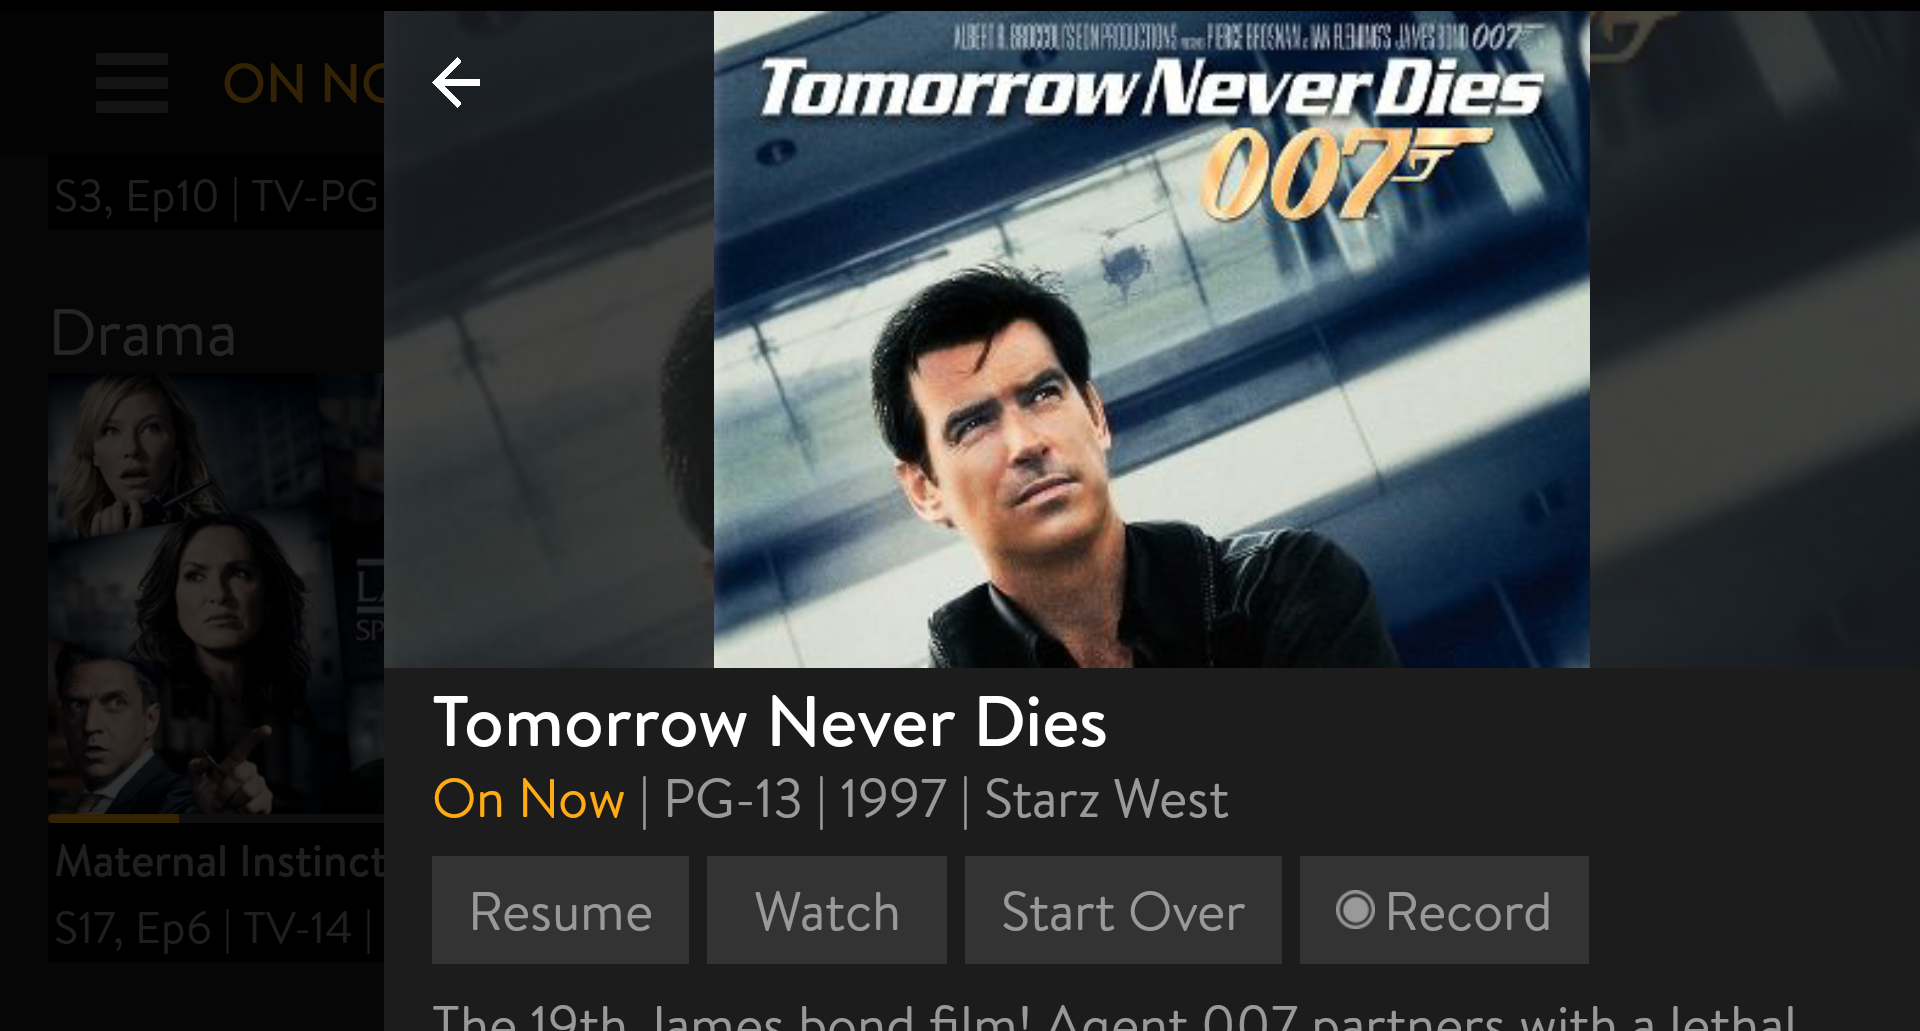 sling tv tomorrow never dies 007 movie streaming android